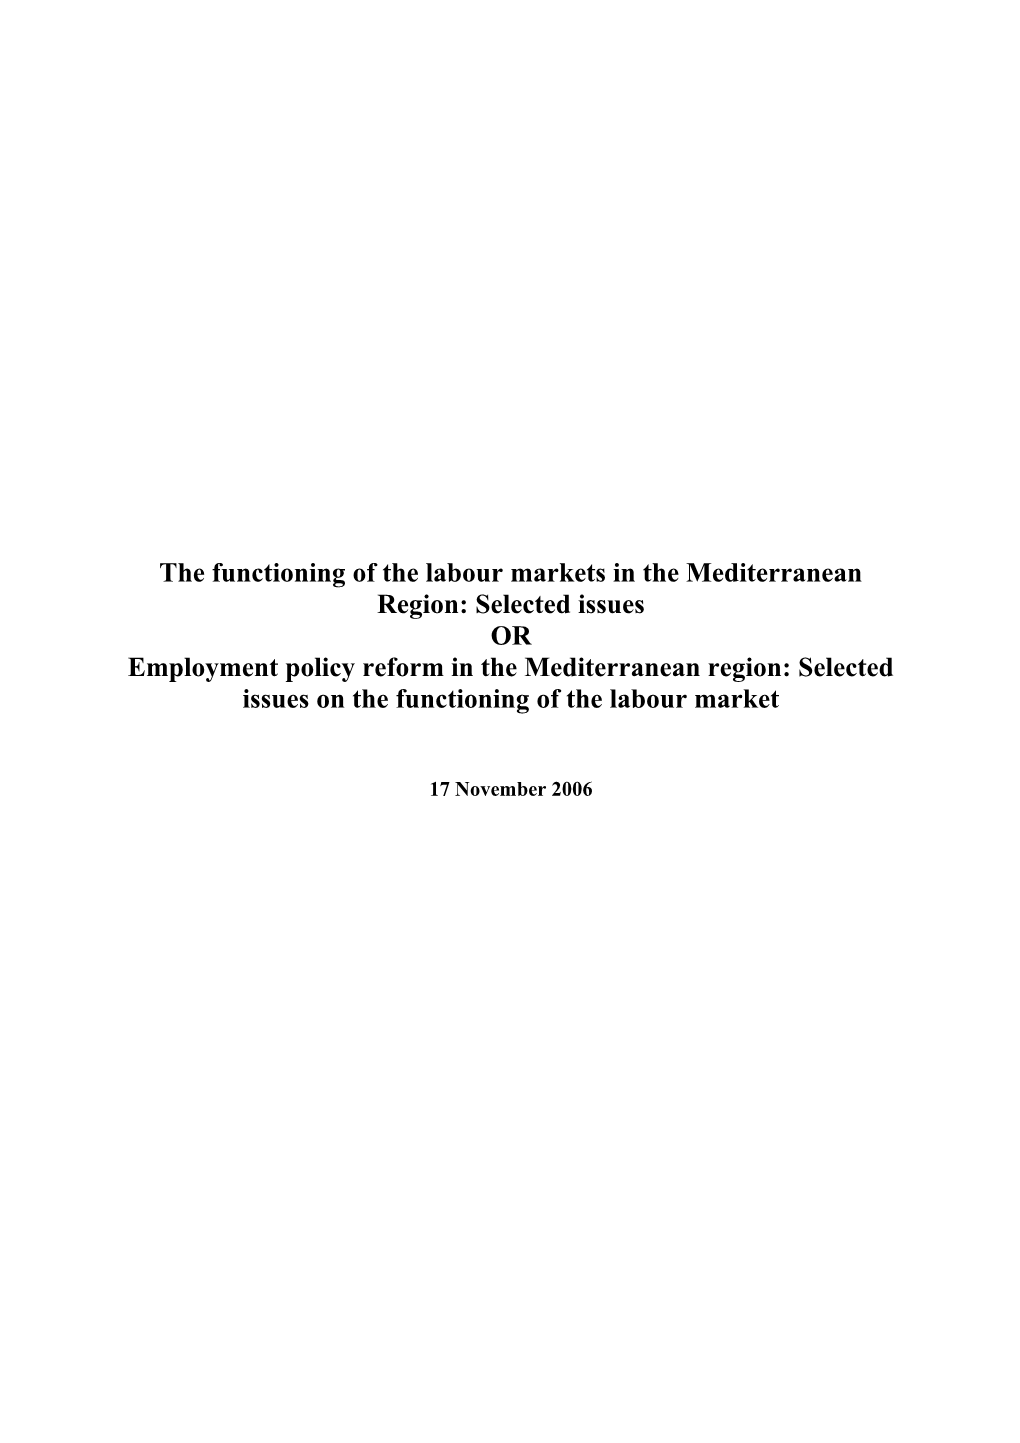 The Functioning of the Labour Markets in the Mediterranean Region and the Implications